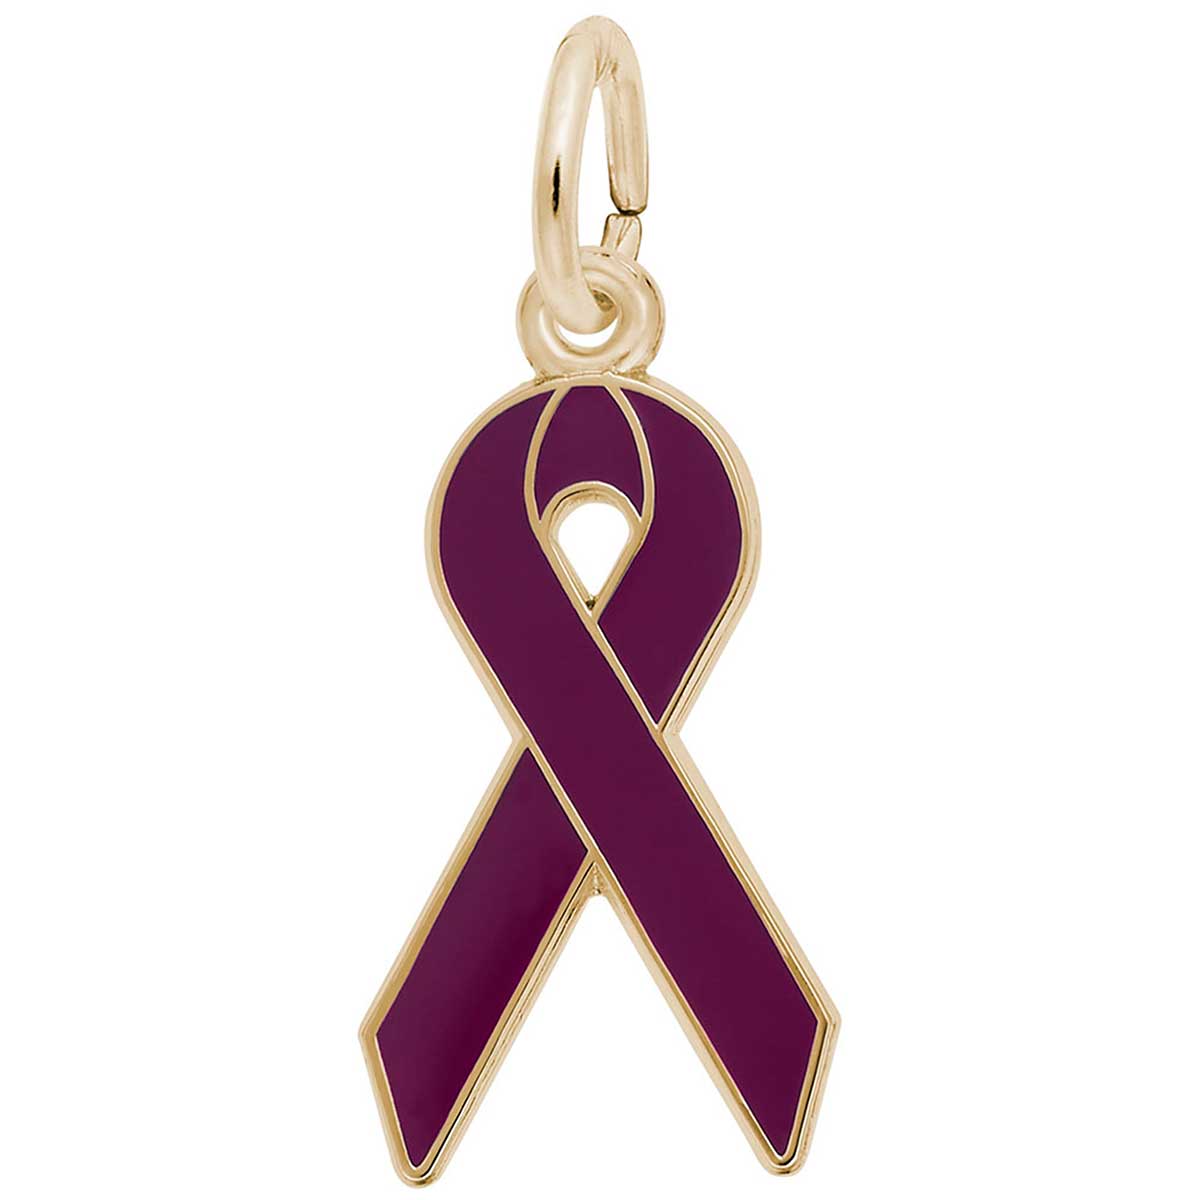 Rembrandt Relay For Life/Purple Ribbon Charm, 10K Yellow Gold: Precious ...